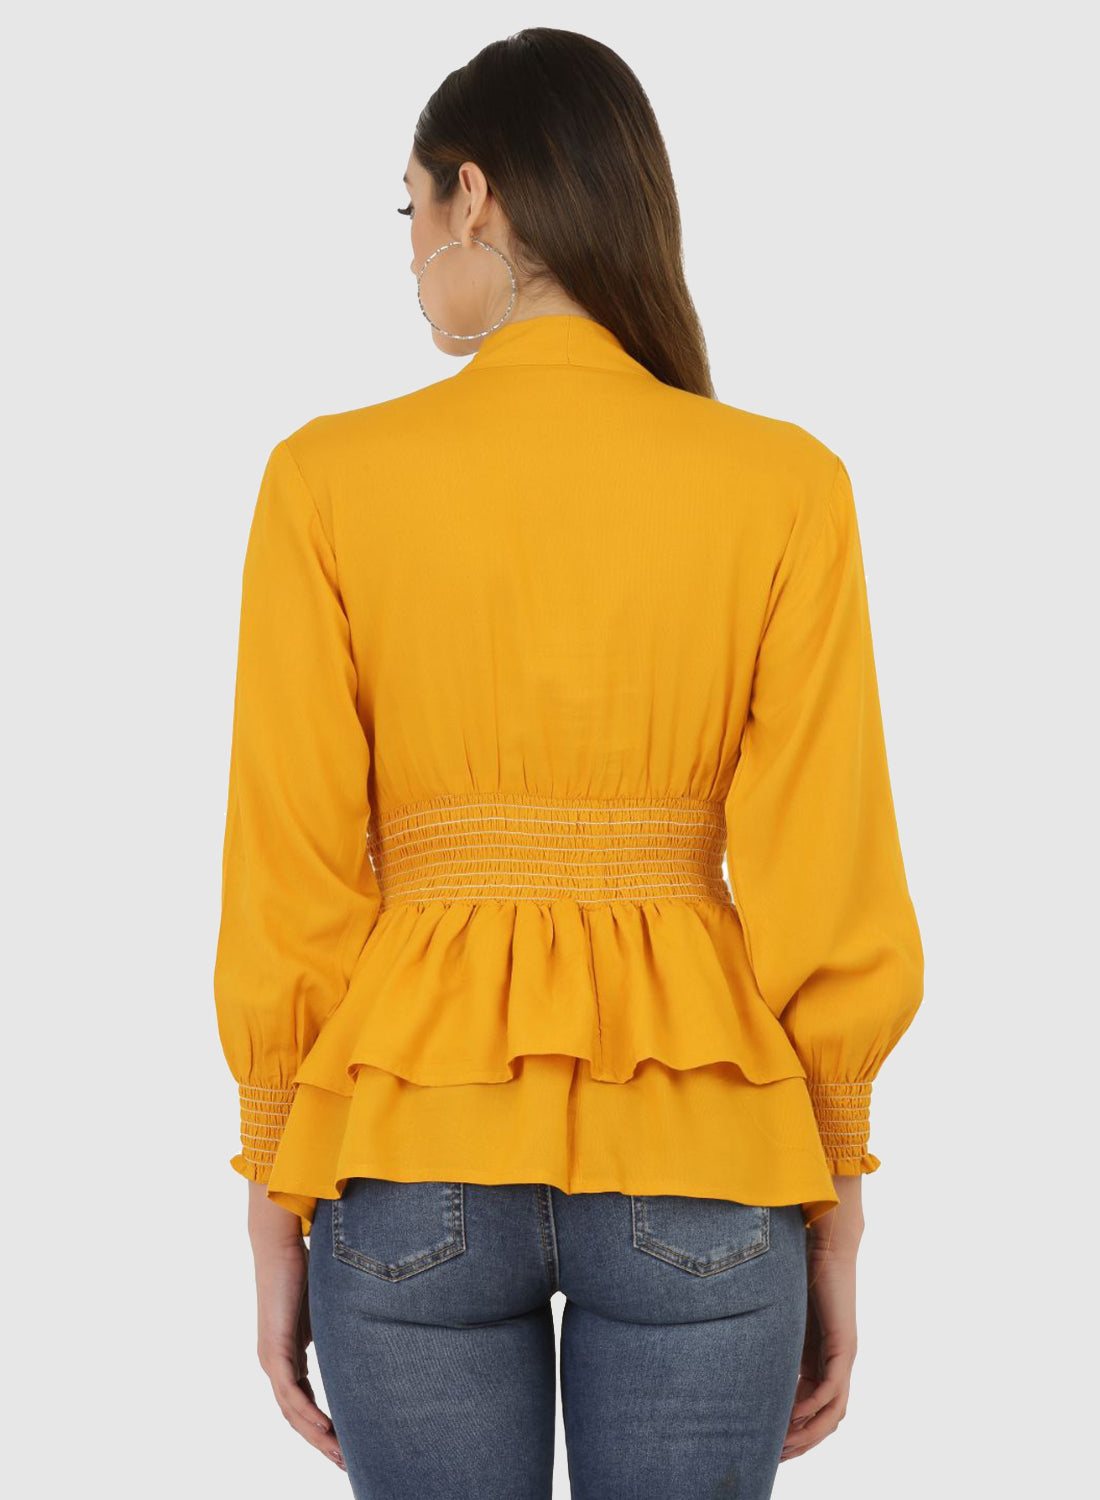 Women Top Mustard Regular Fit and Flare